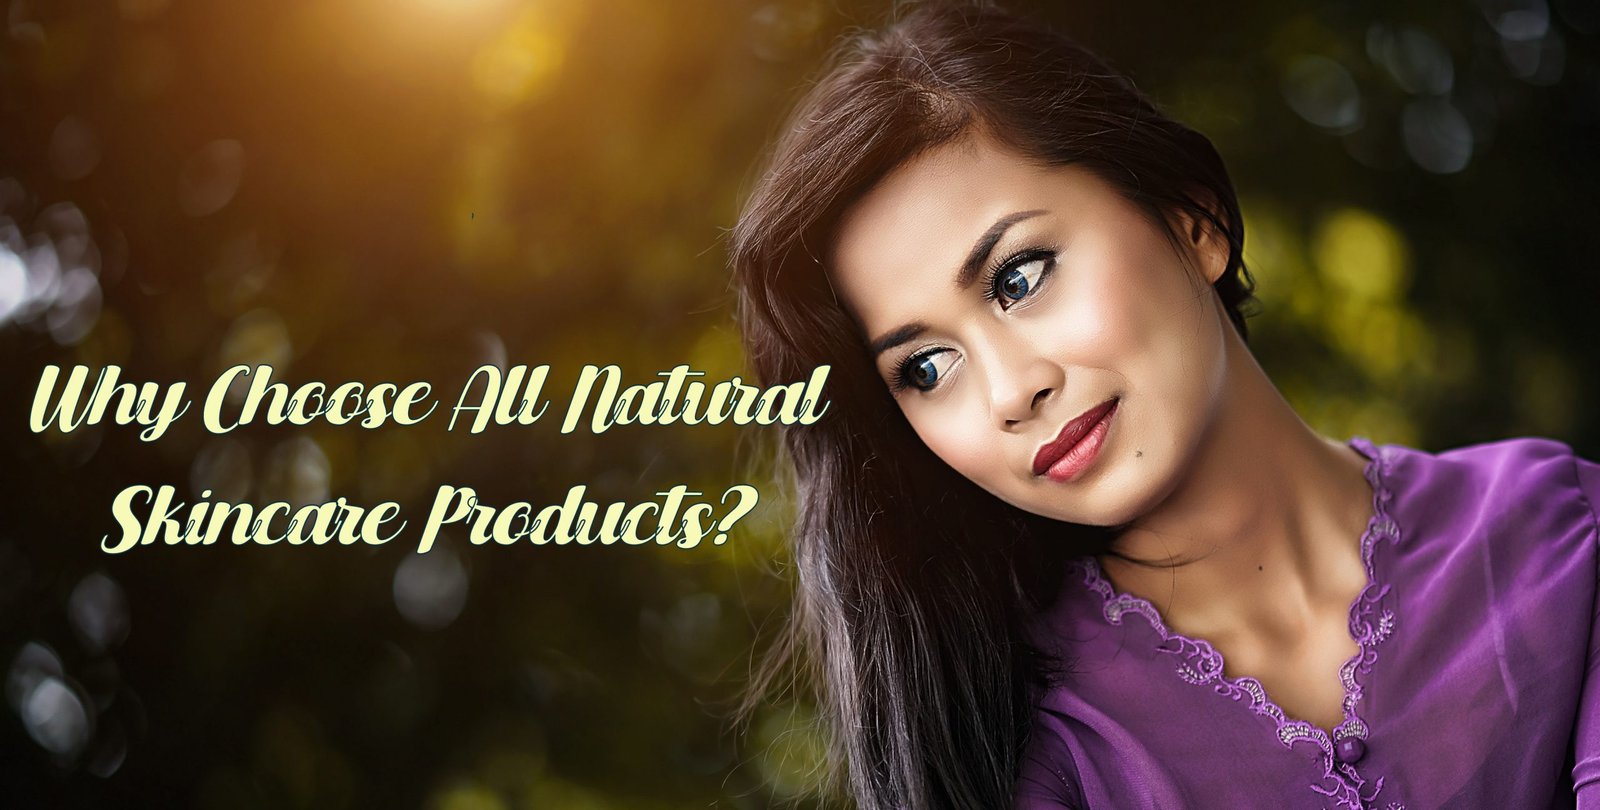 Why Choose Natural Skin Care Products?